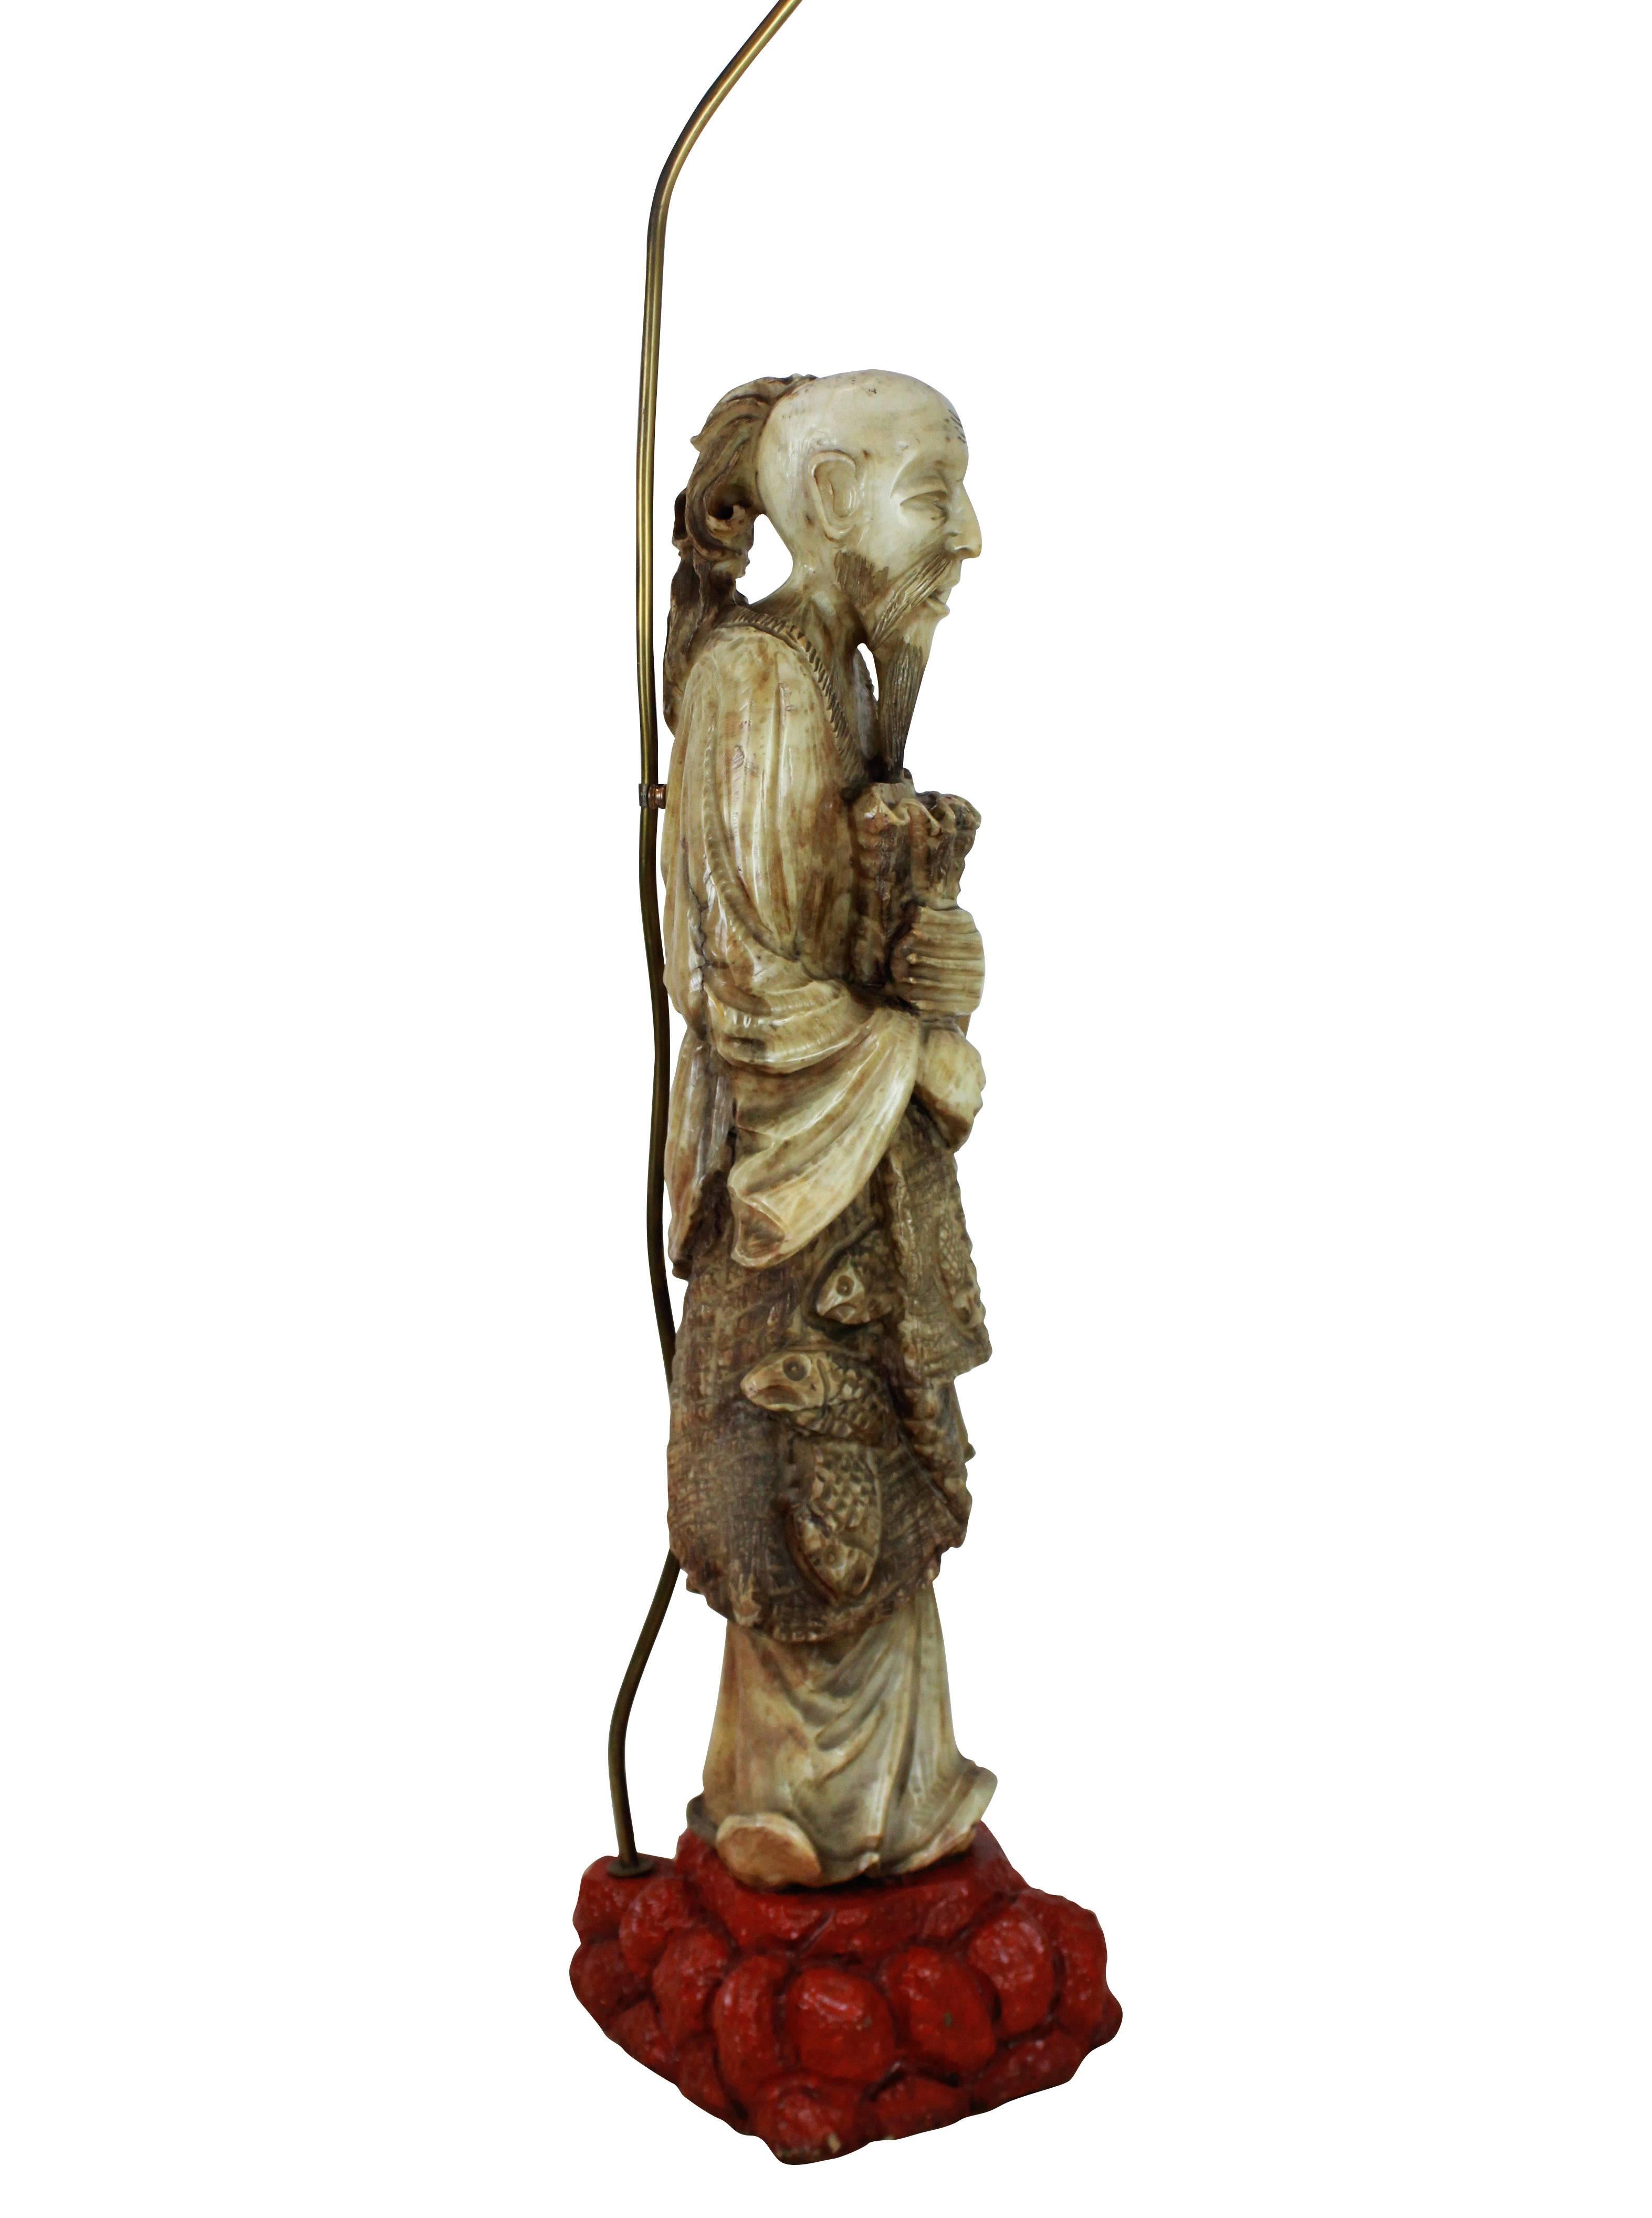 A finely carved Chinese figure of a fisherman, mounted on a red lacquered stone base, converted into a floor lamp.

 The figure is 19th century.